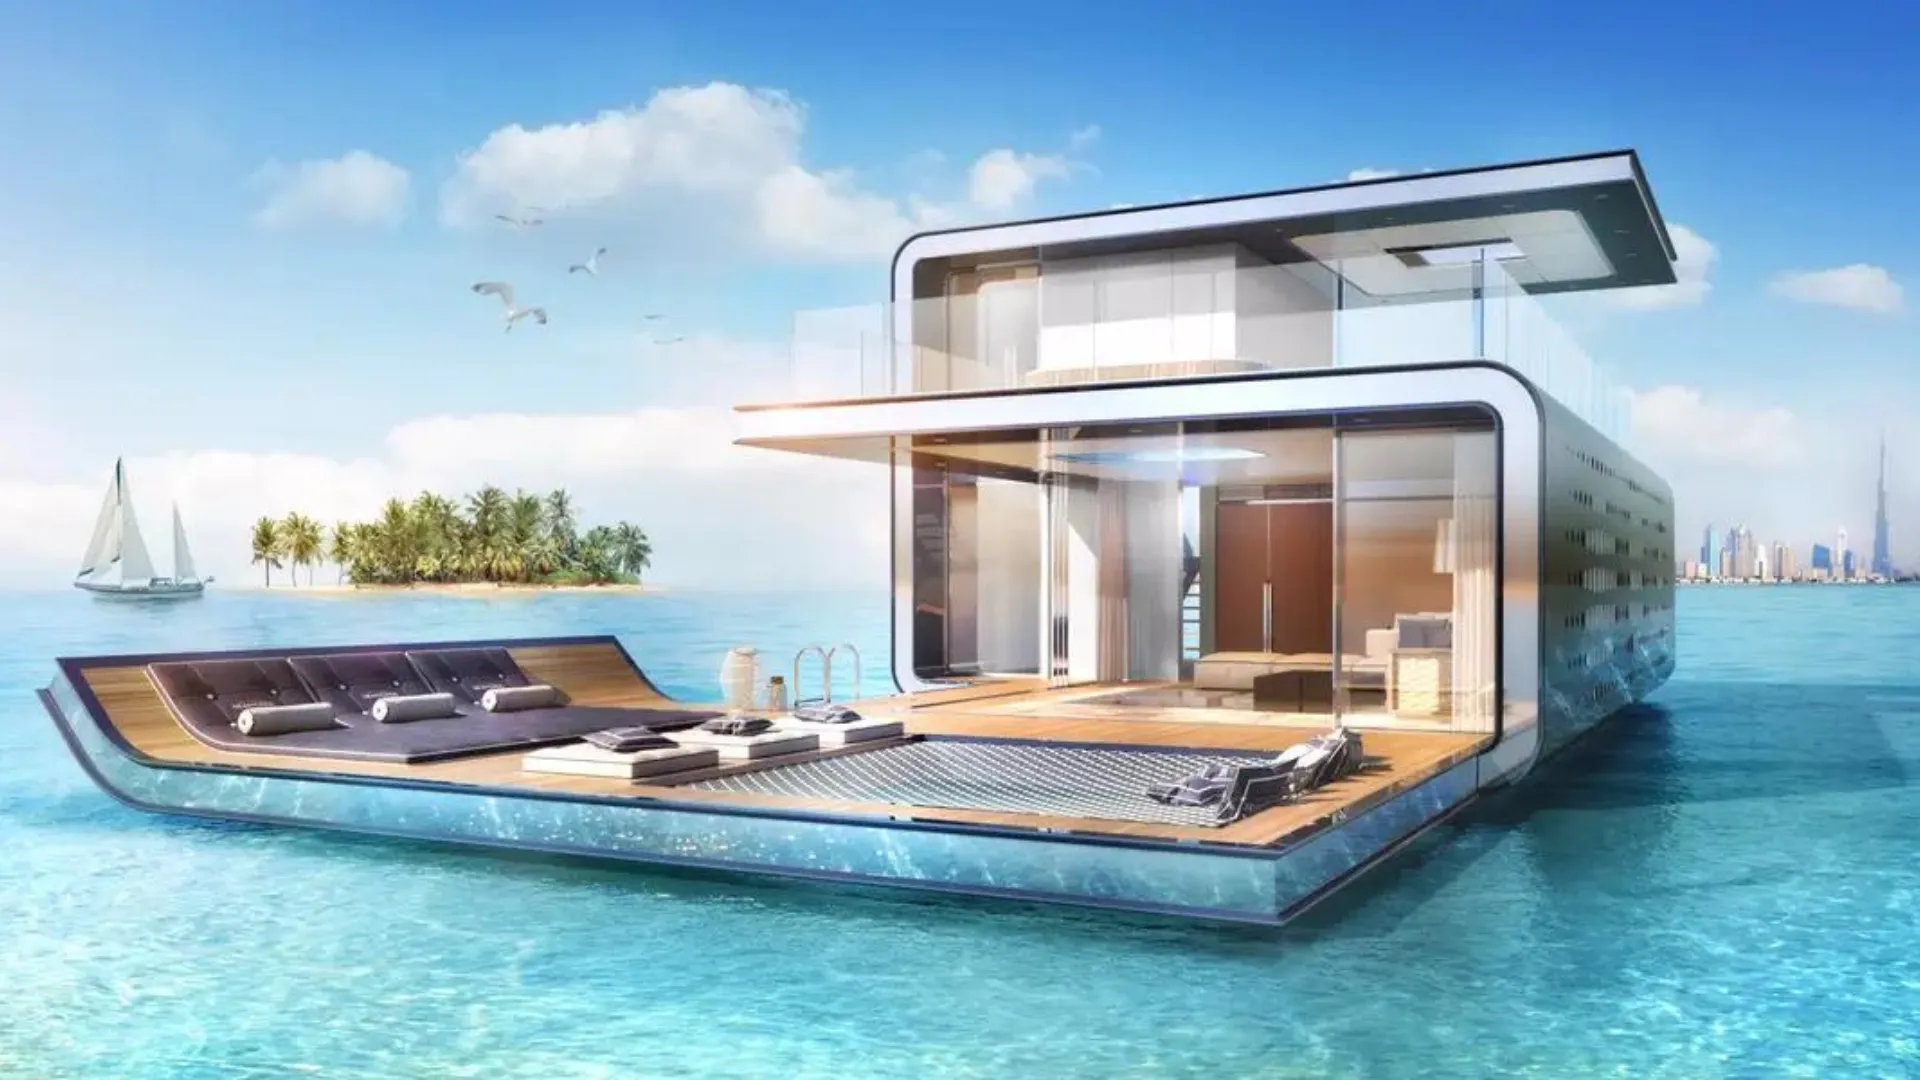 The World Islands 2 Bed Floating Seahorse Property In Dubai - Good ROI_1